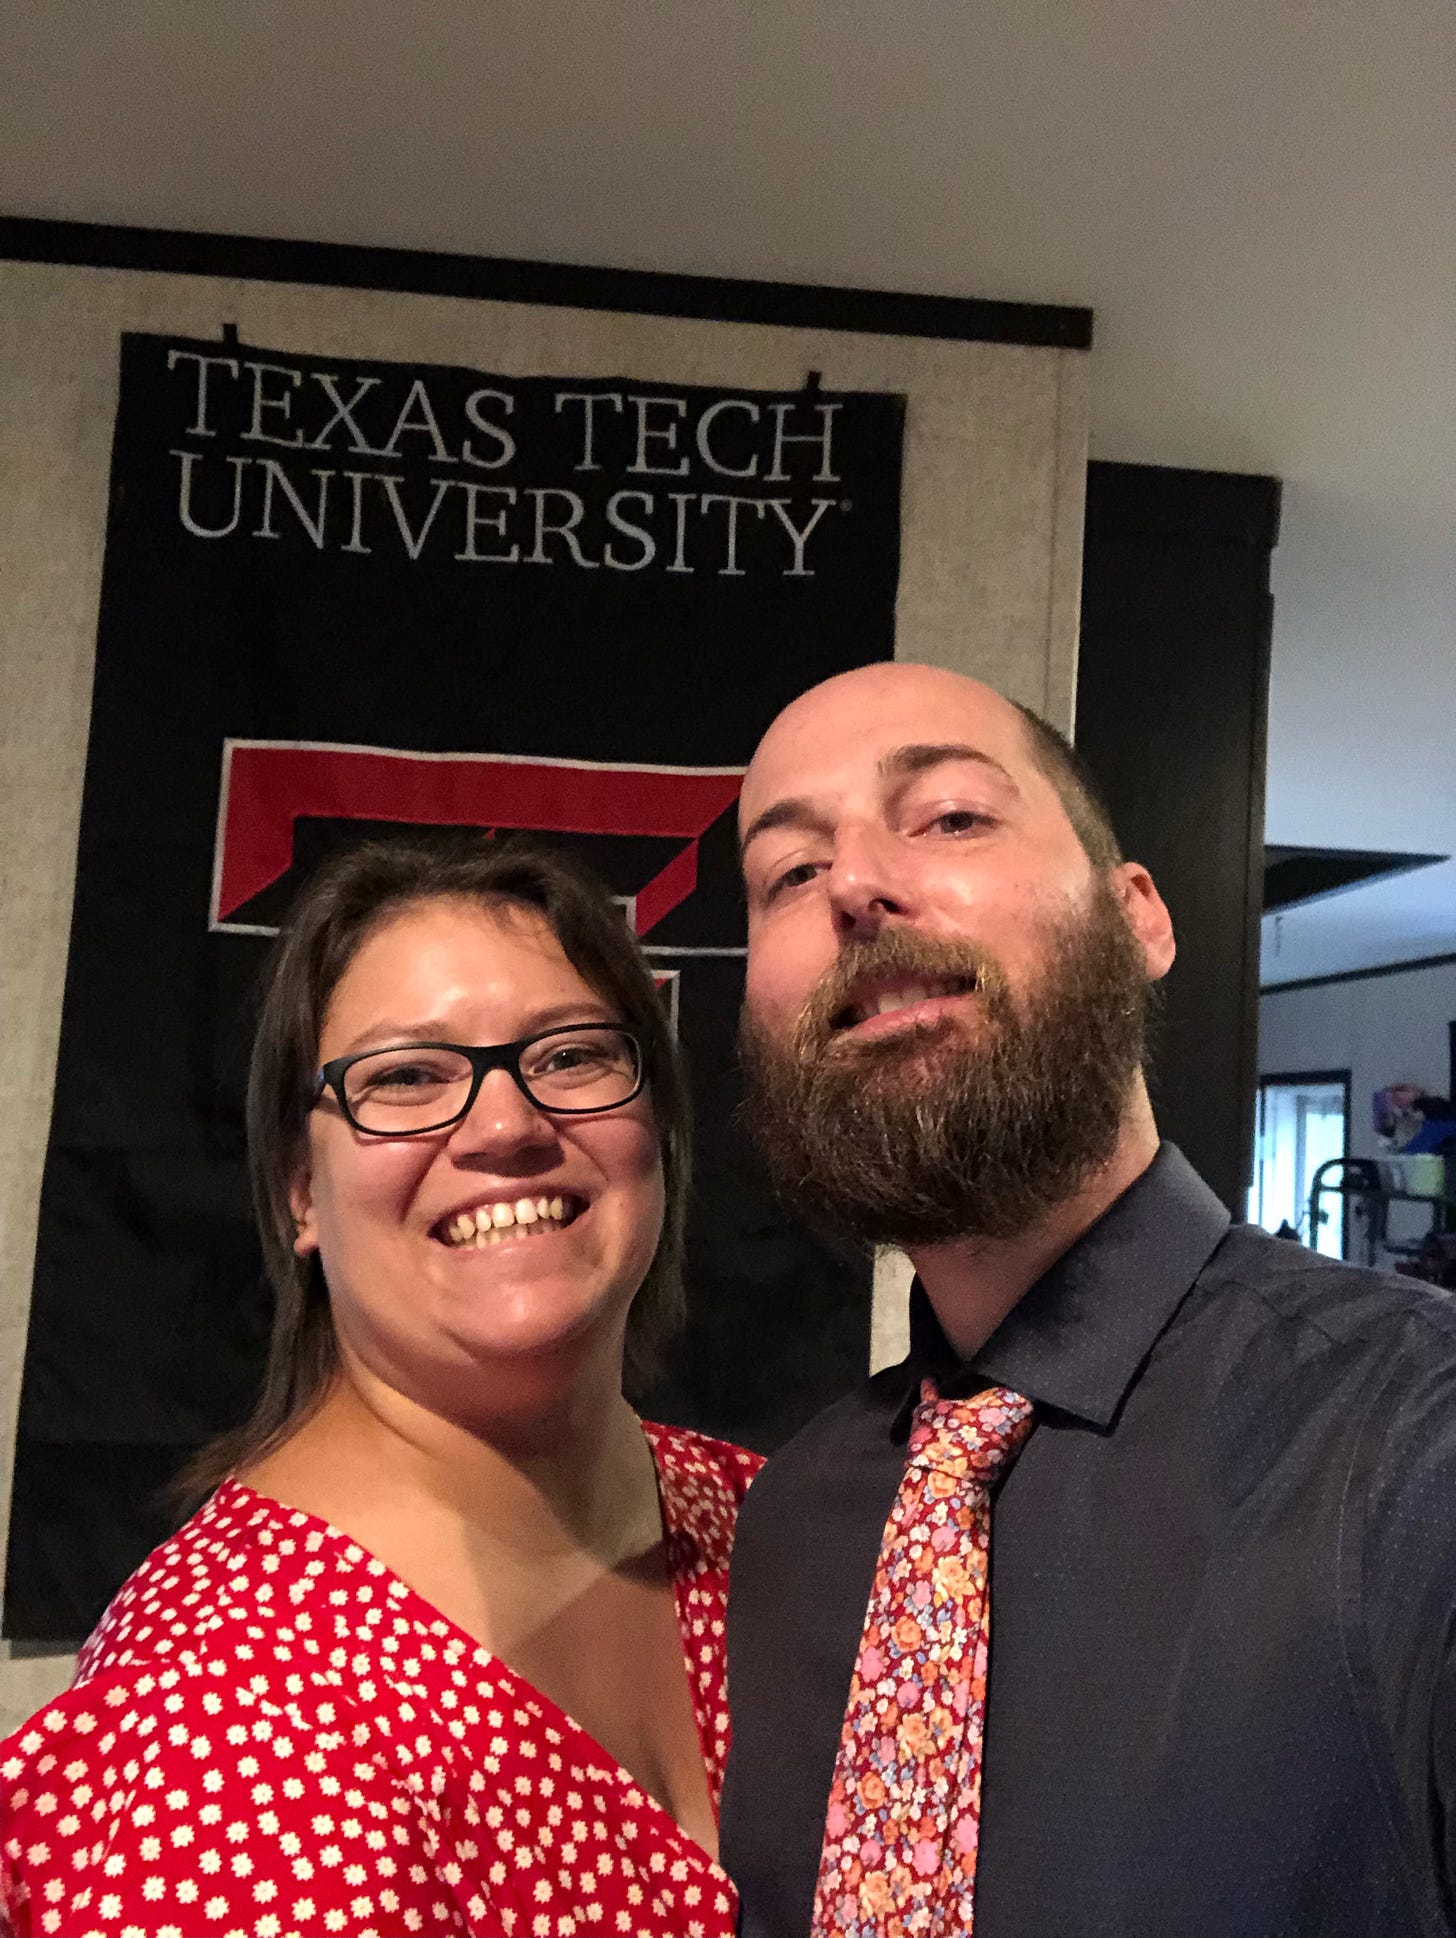 A white lady in a red polka-dotted dress and a bearded white dude in a blue shirt and pretty flower tie